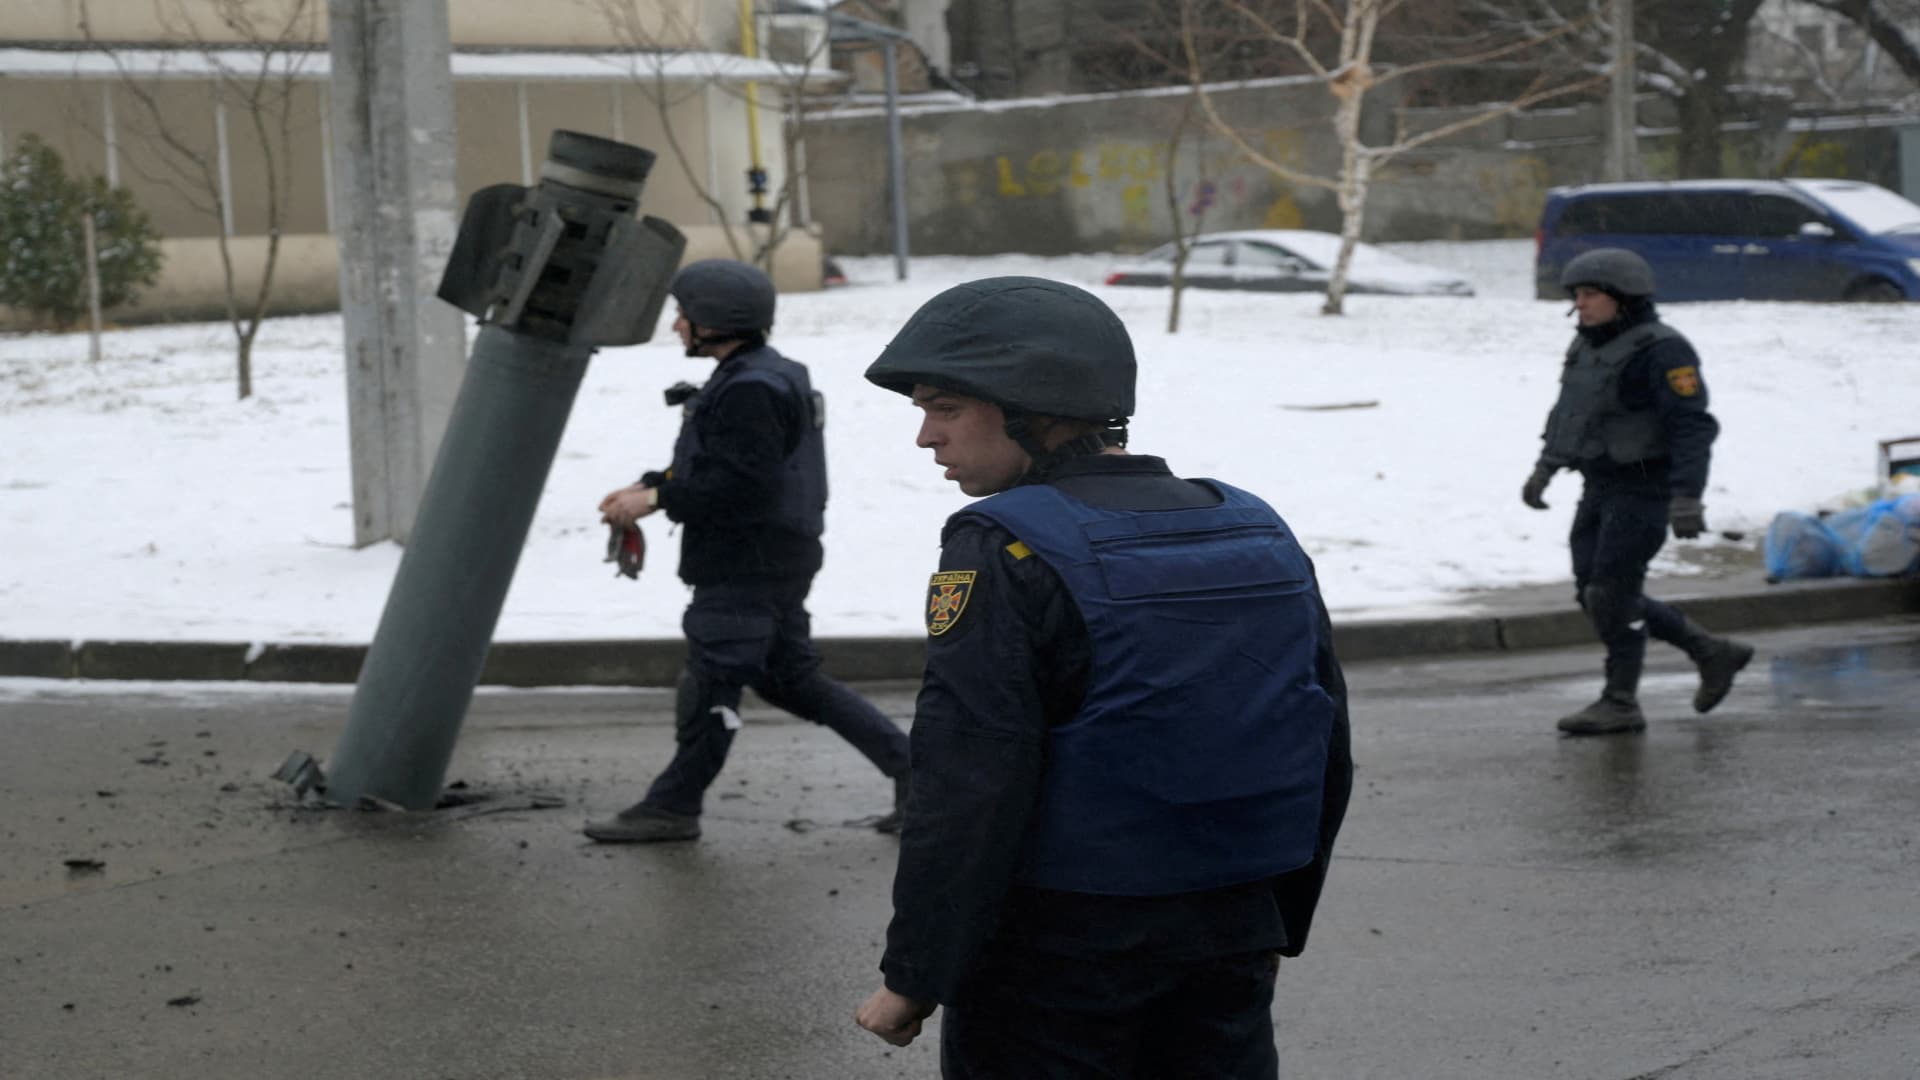 FILE PHOTO: Members of the State Emergency Service of Ukraine walk towards a rocket case stuck on the driveway following recent shelling in Kharkiv, Ukraine February 25, 2022. 